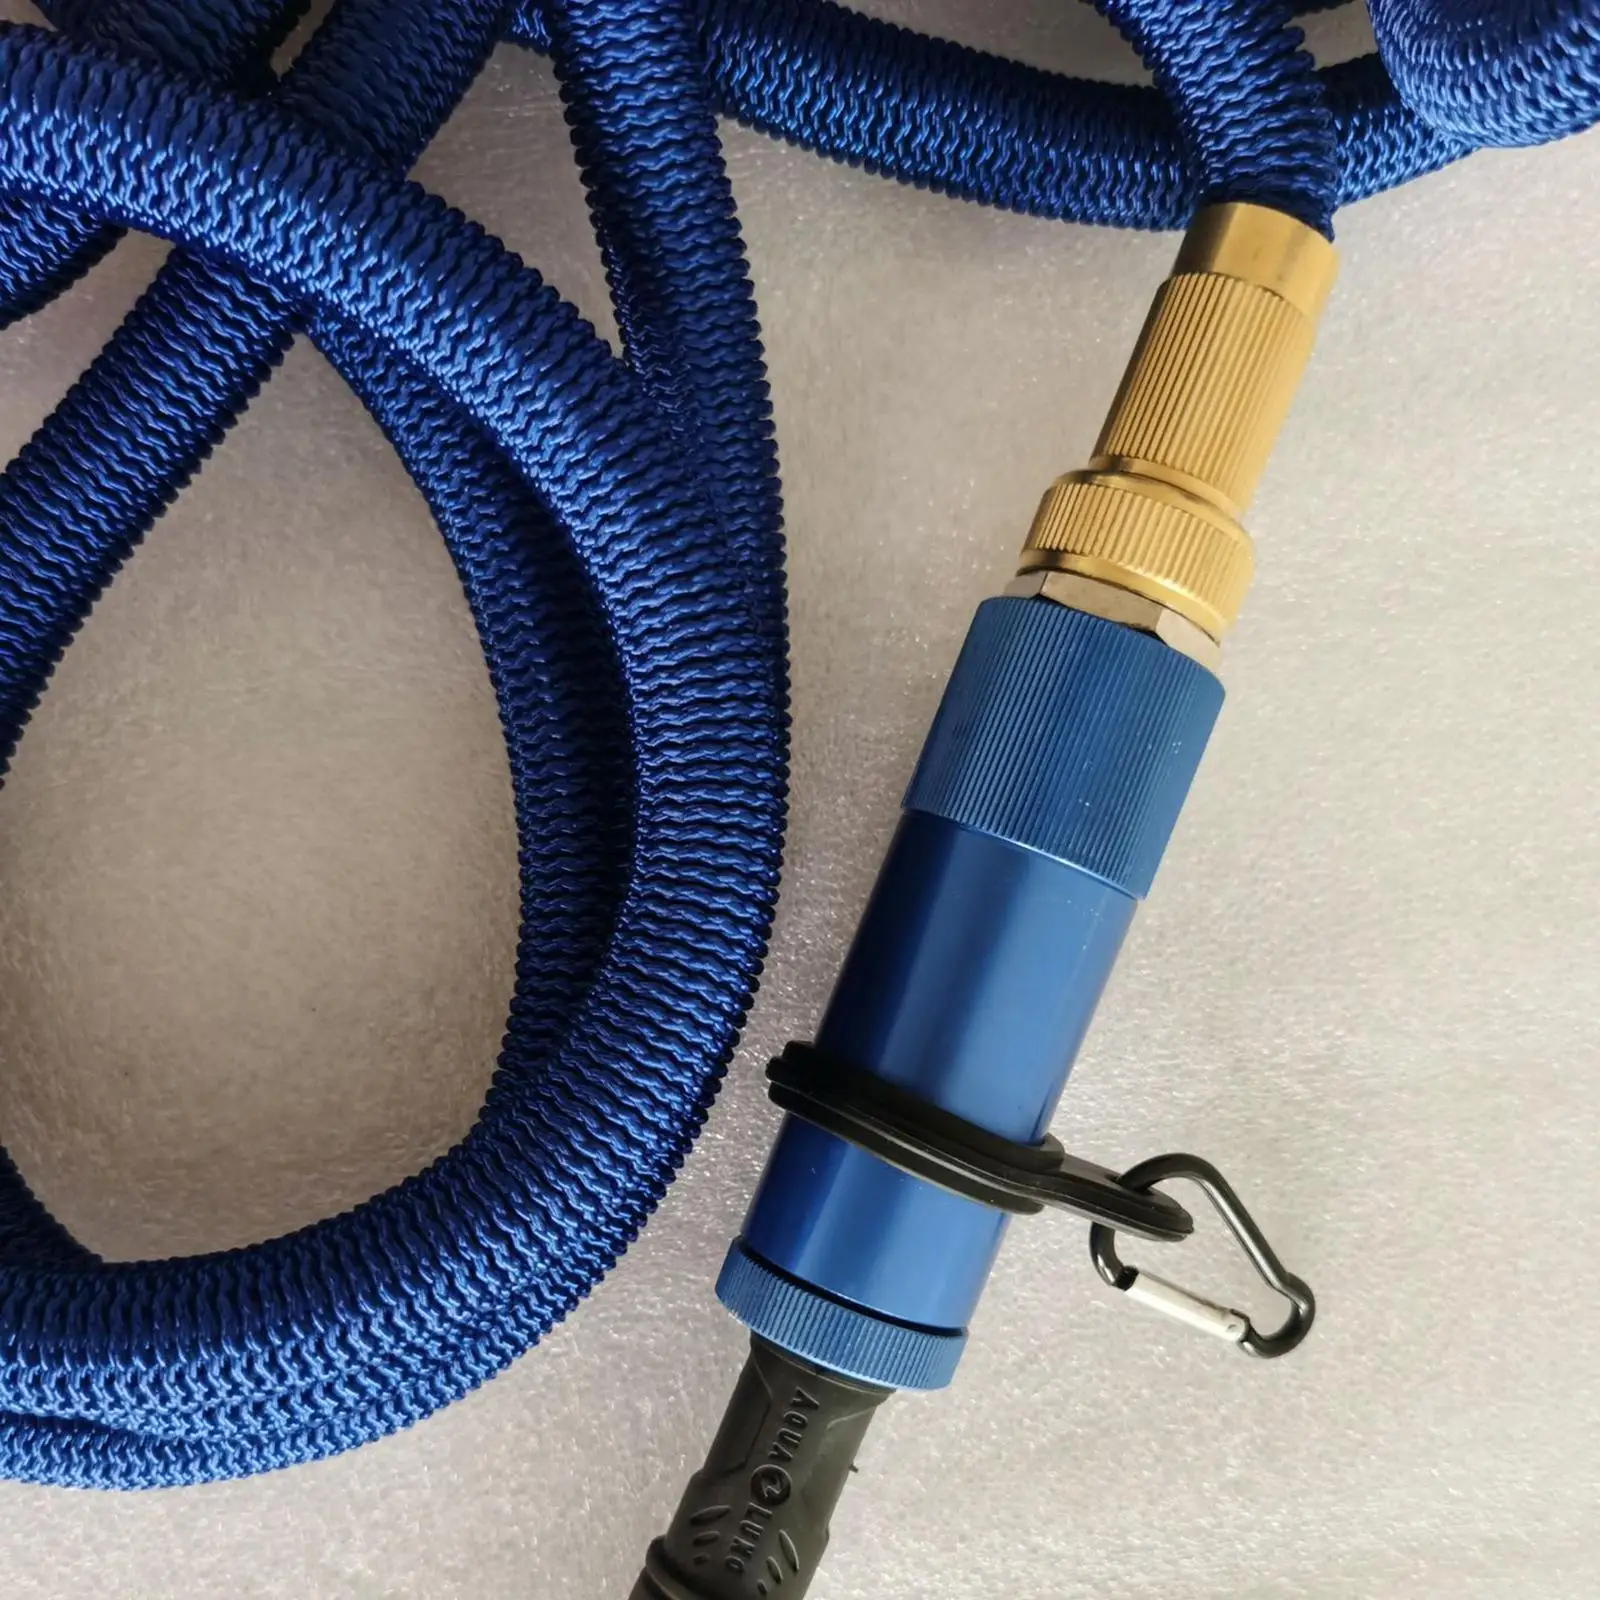 Diving Telescopic Tube 14M / 551.18inch Snorkel Snorkeling Diving Unisex Diving Equipment for Sea Diving